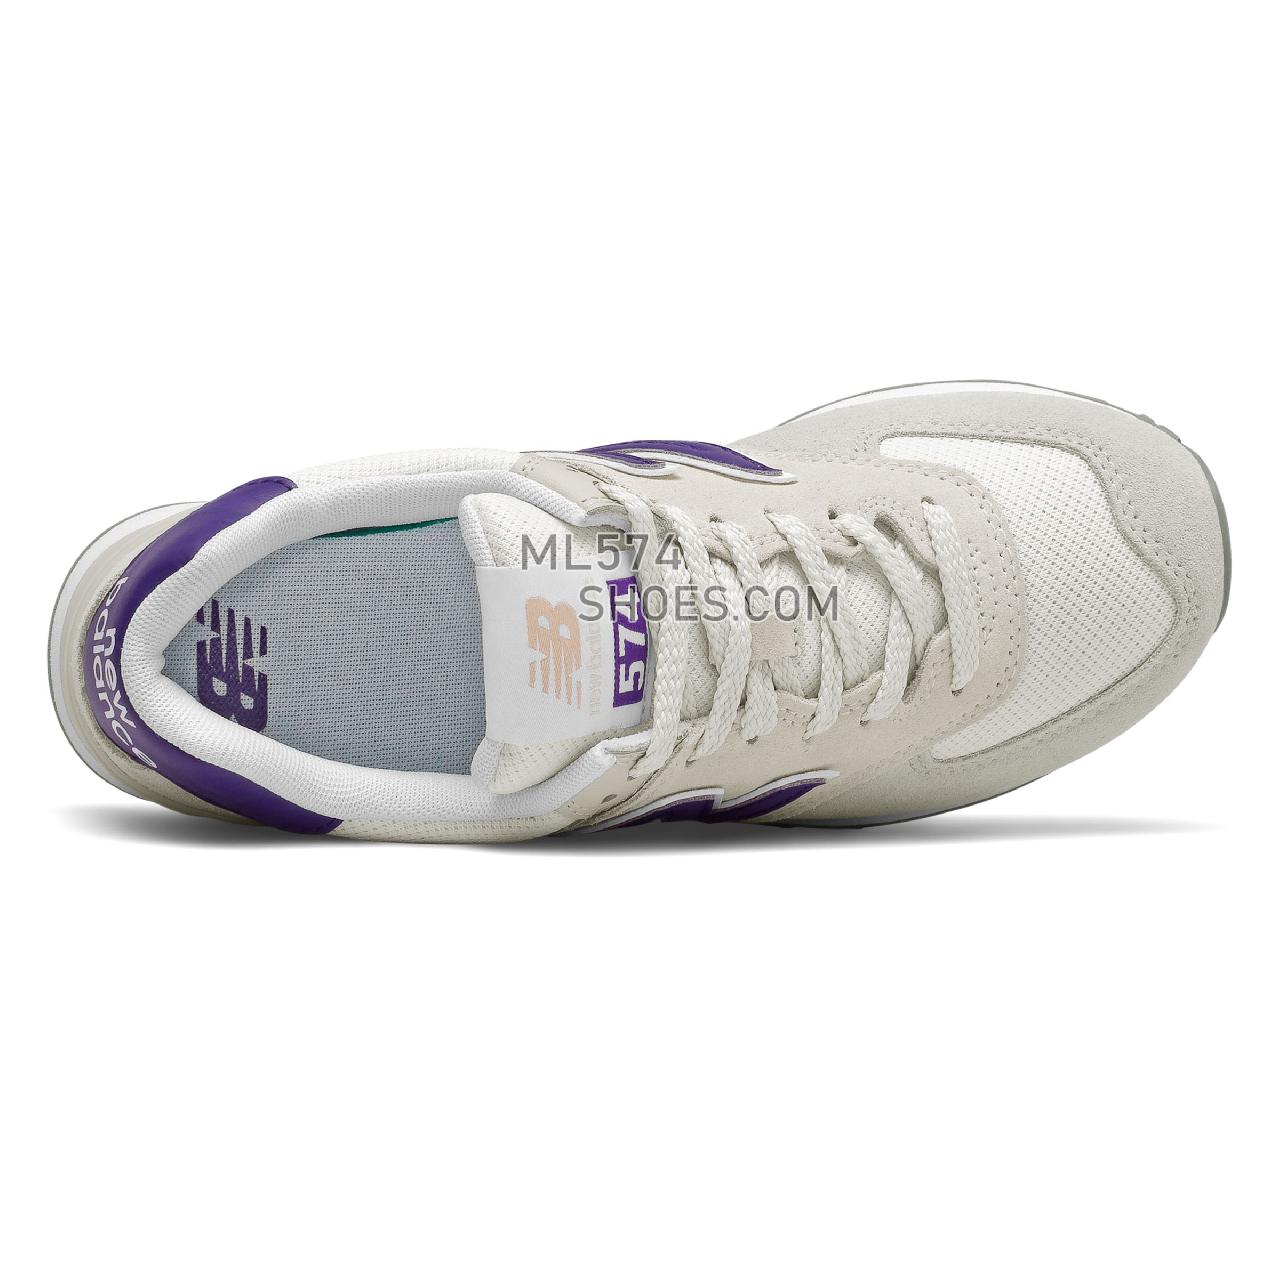 New Balance 574 - Women's Classic Sneakers - Timberwolf with Virtual Violet - WL574SM2